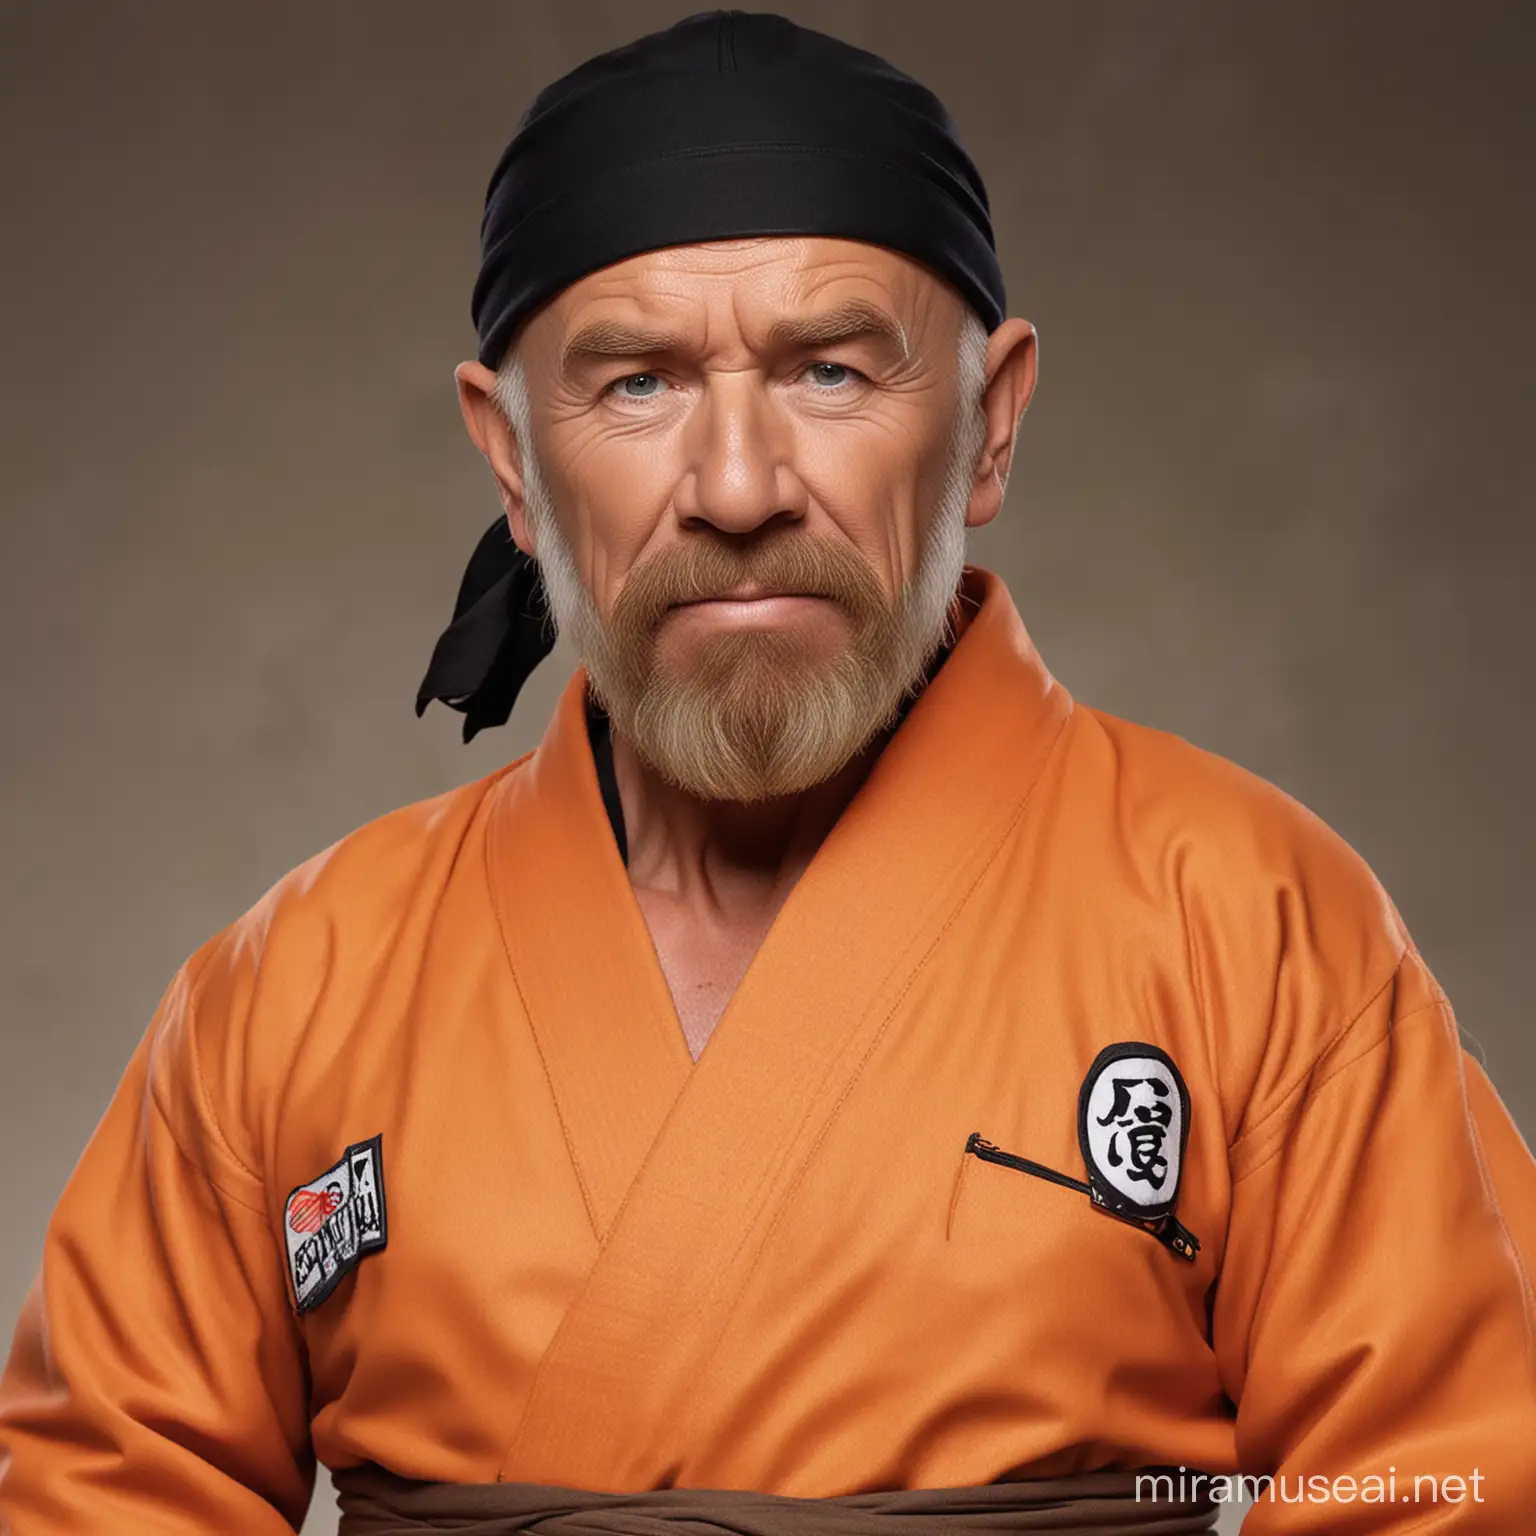 CHUCK NORRIS AS MASTER ROSHI FROM DRAGONBALL Z
